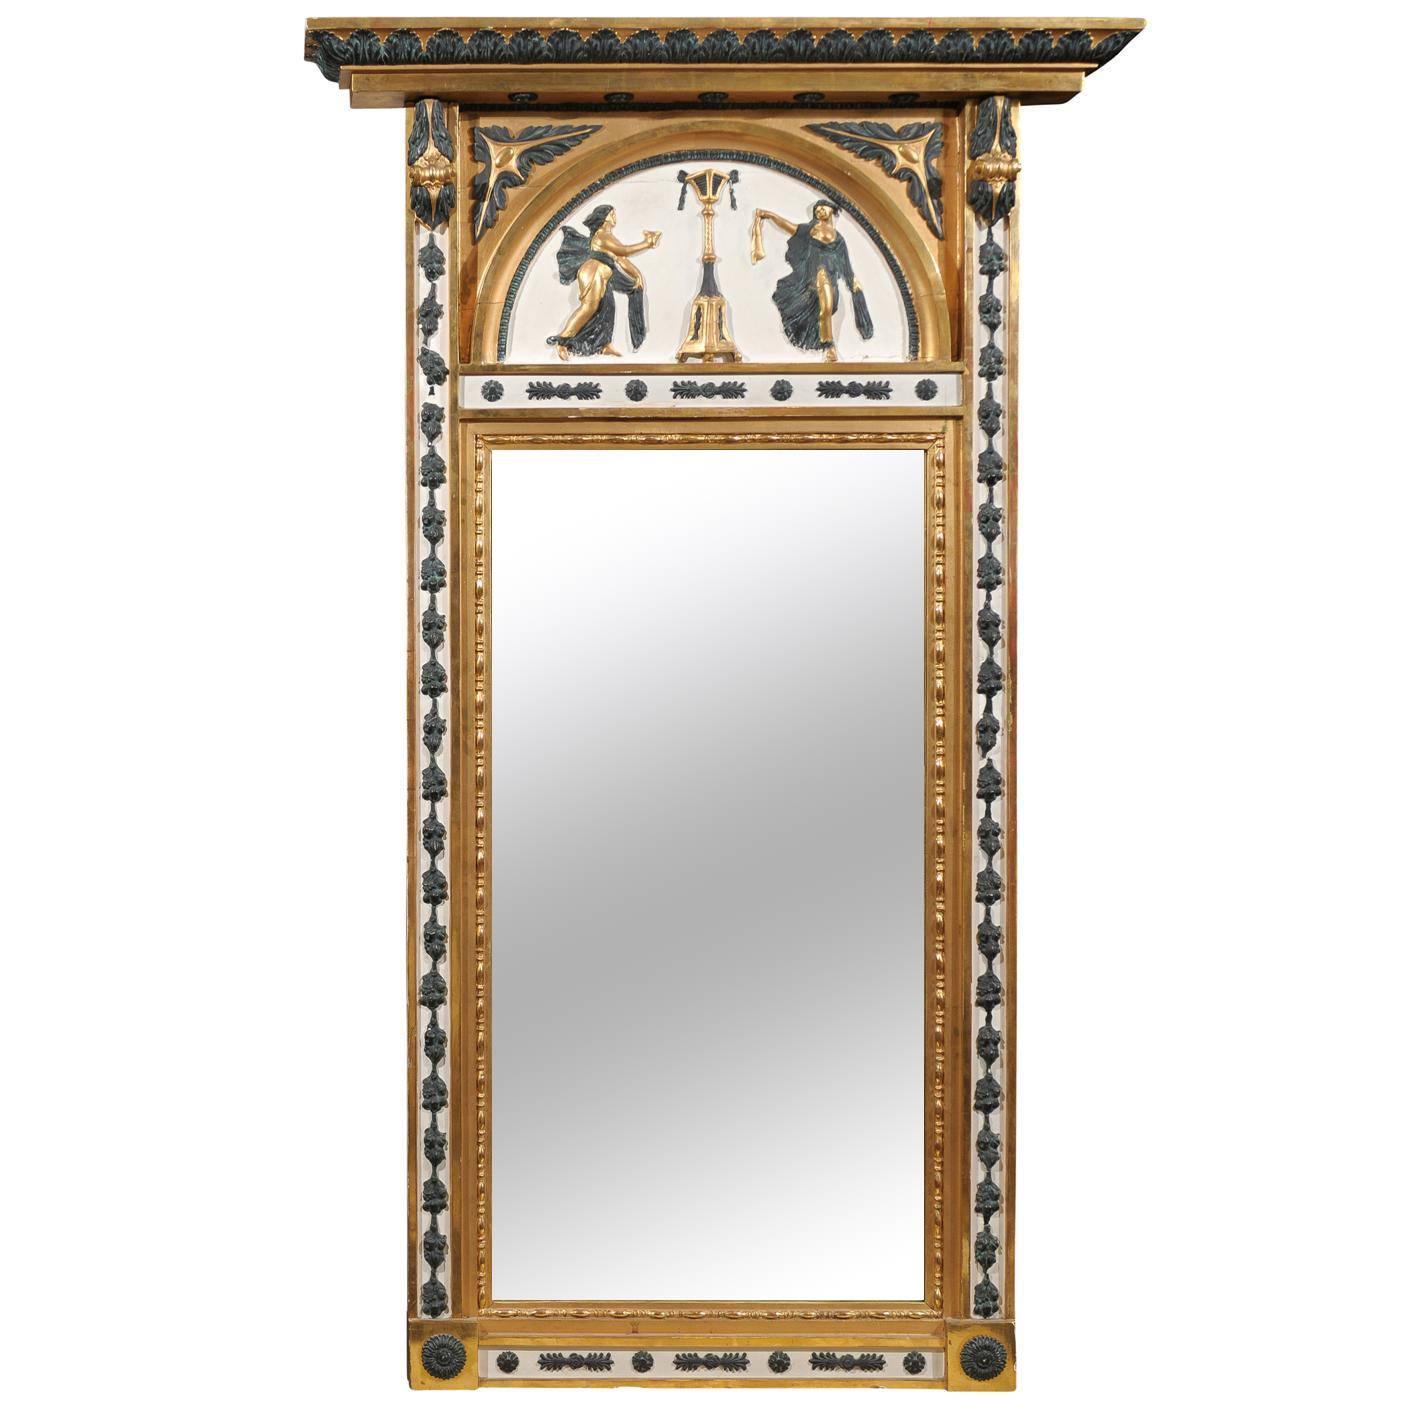 Swedish Neoclassical Giltwood and Green Painted Mirror, circa 1820